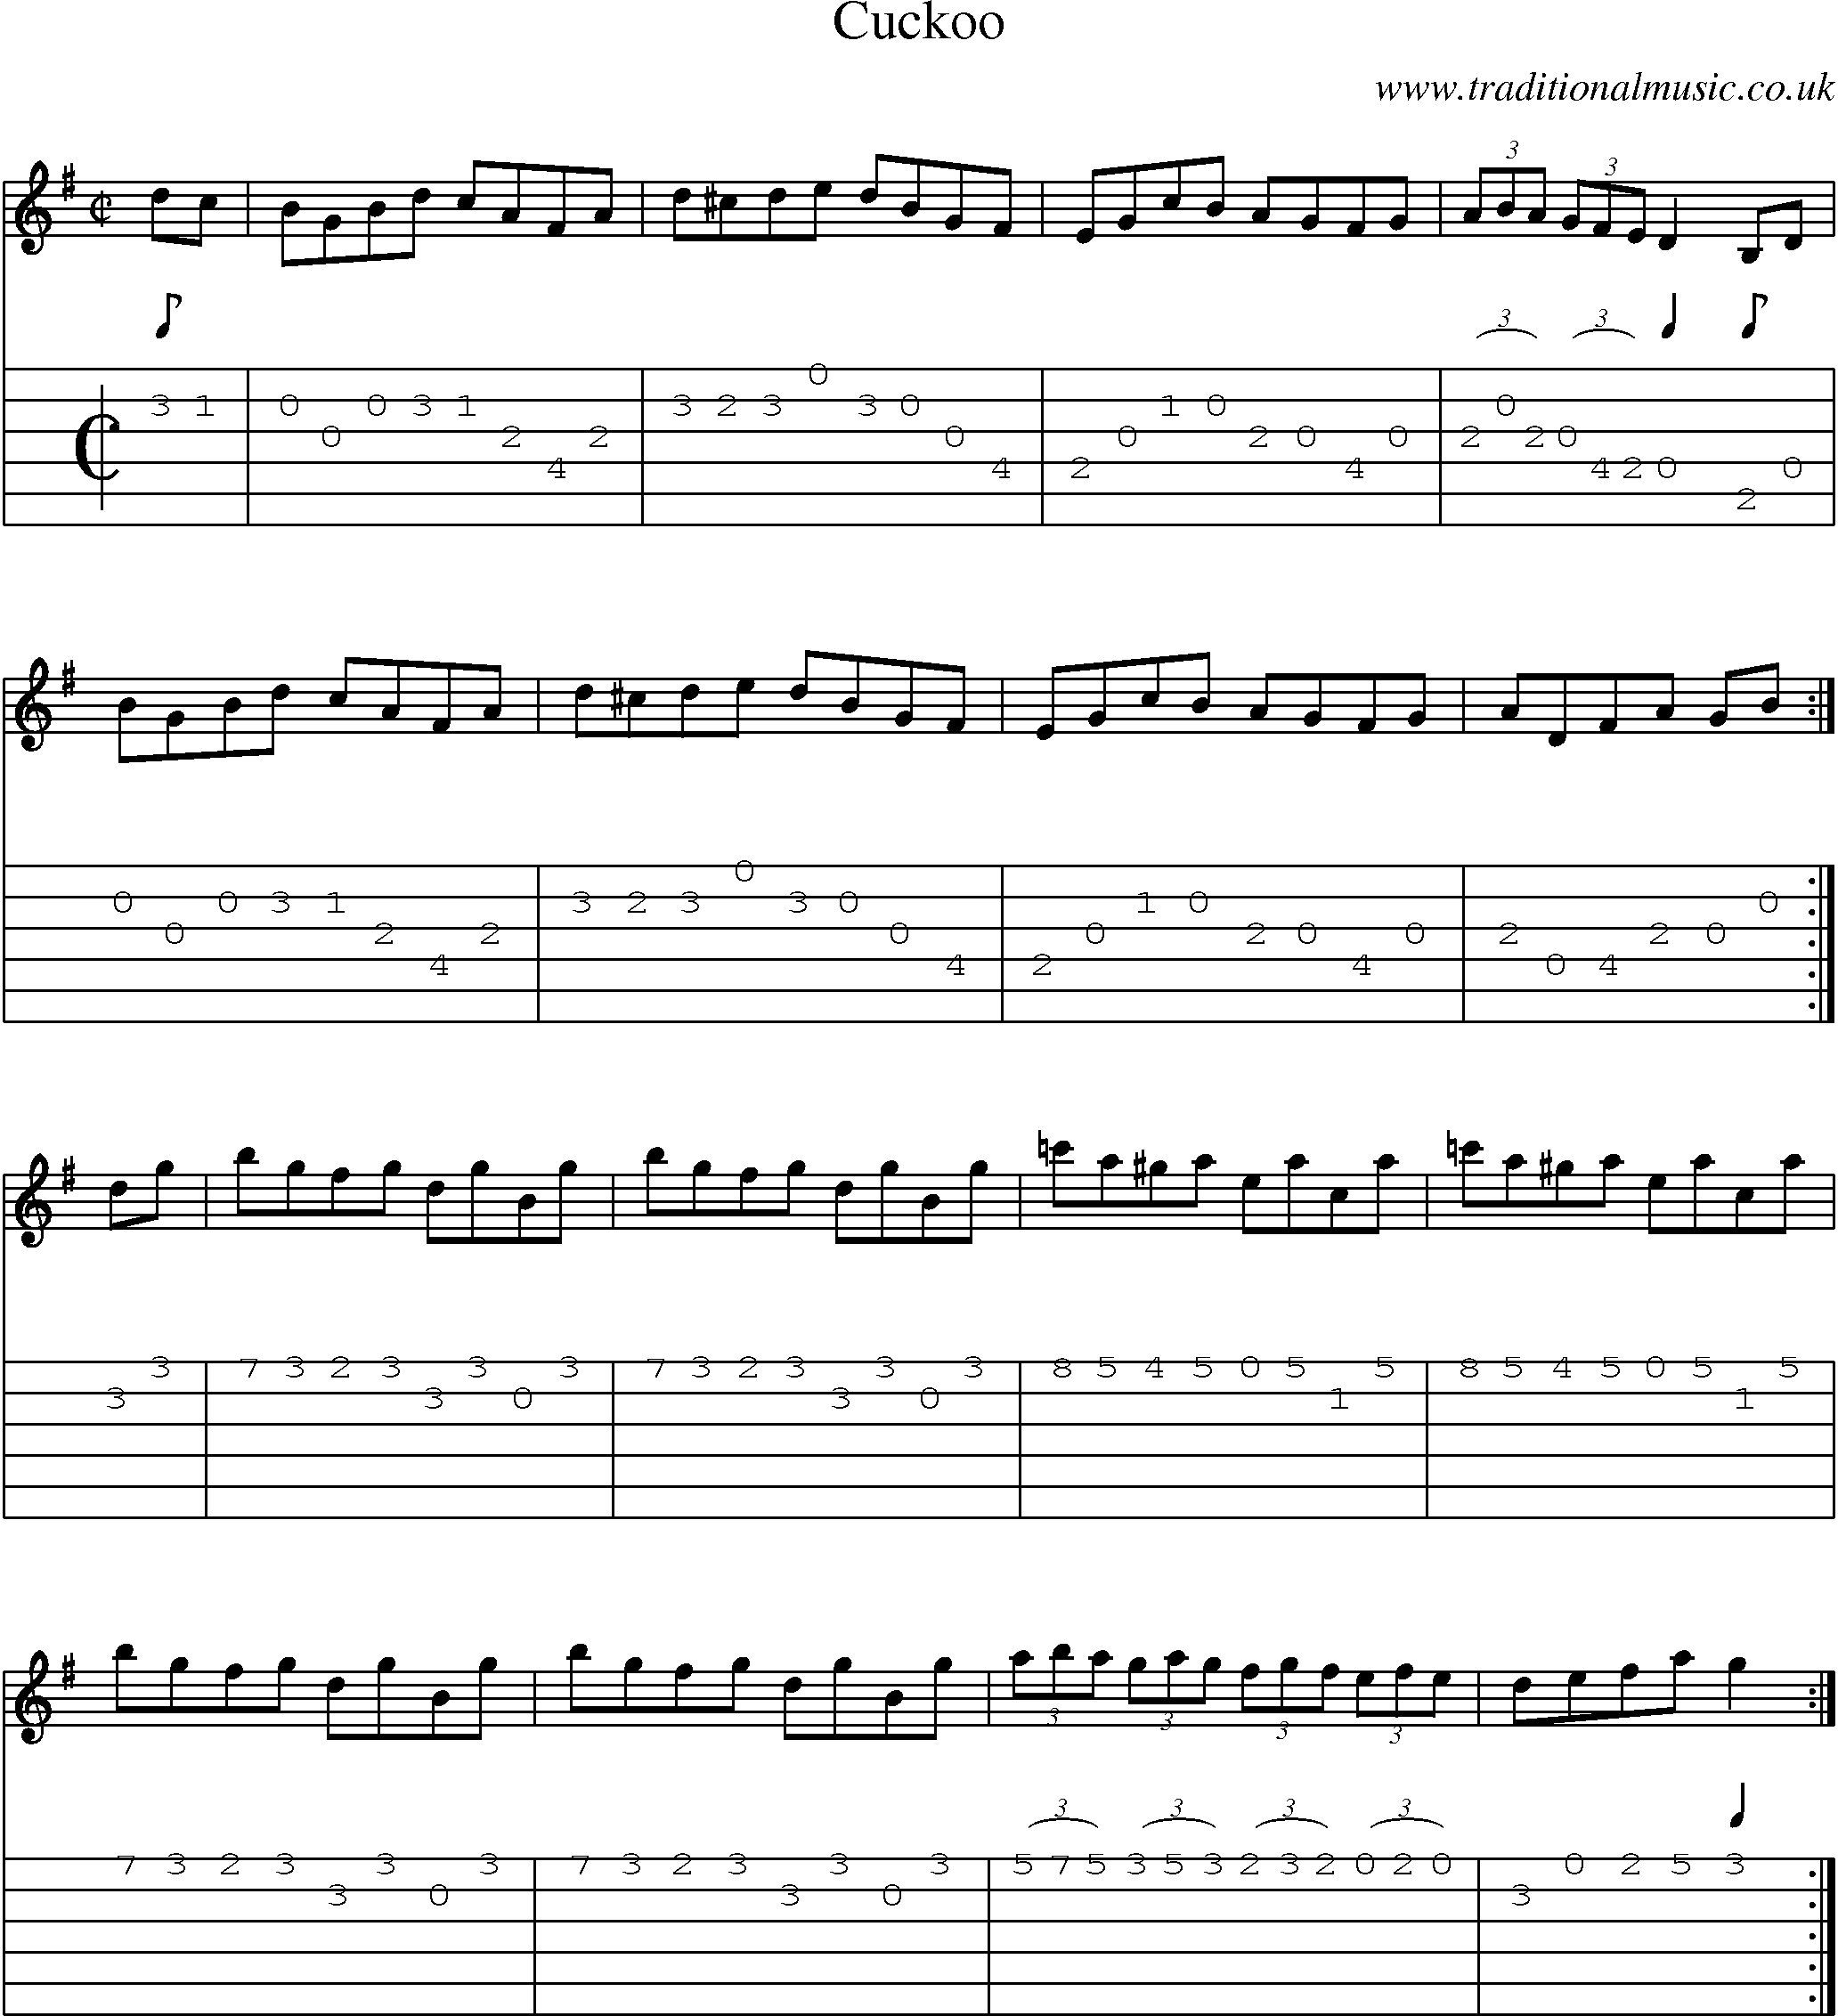 Music Score and Guitar Tabs for Cuckoo